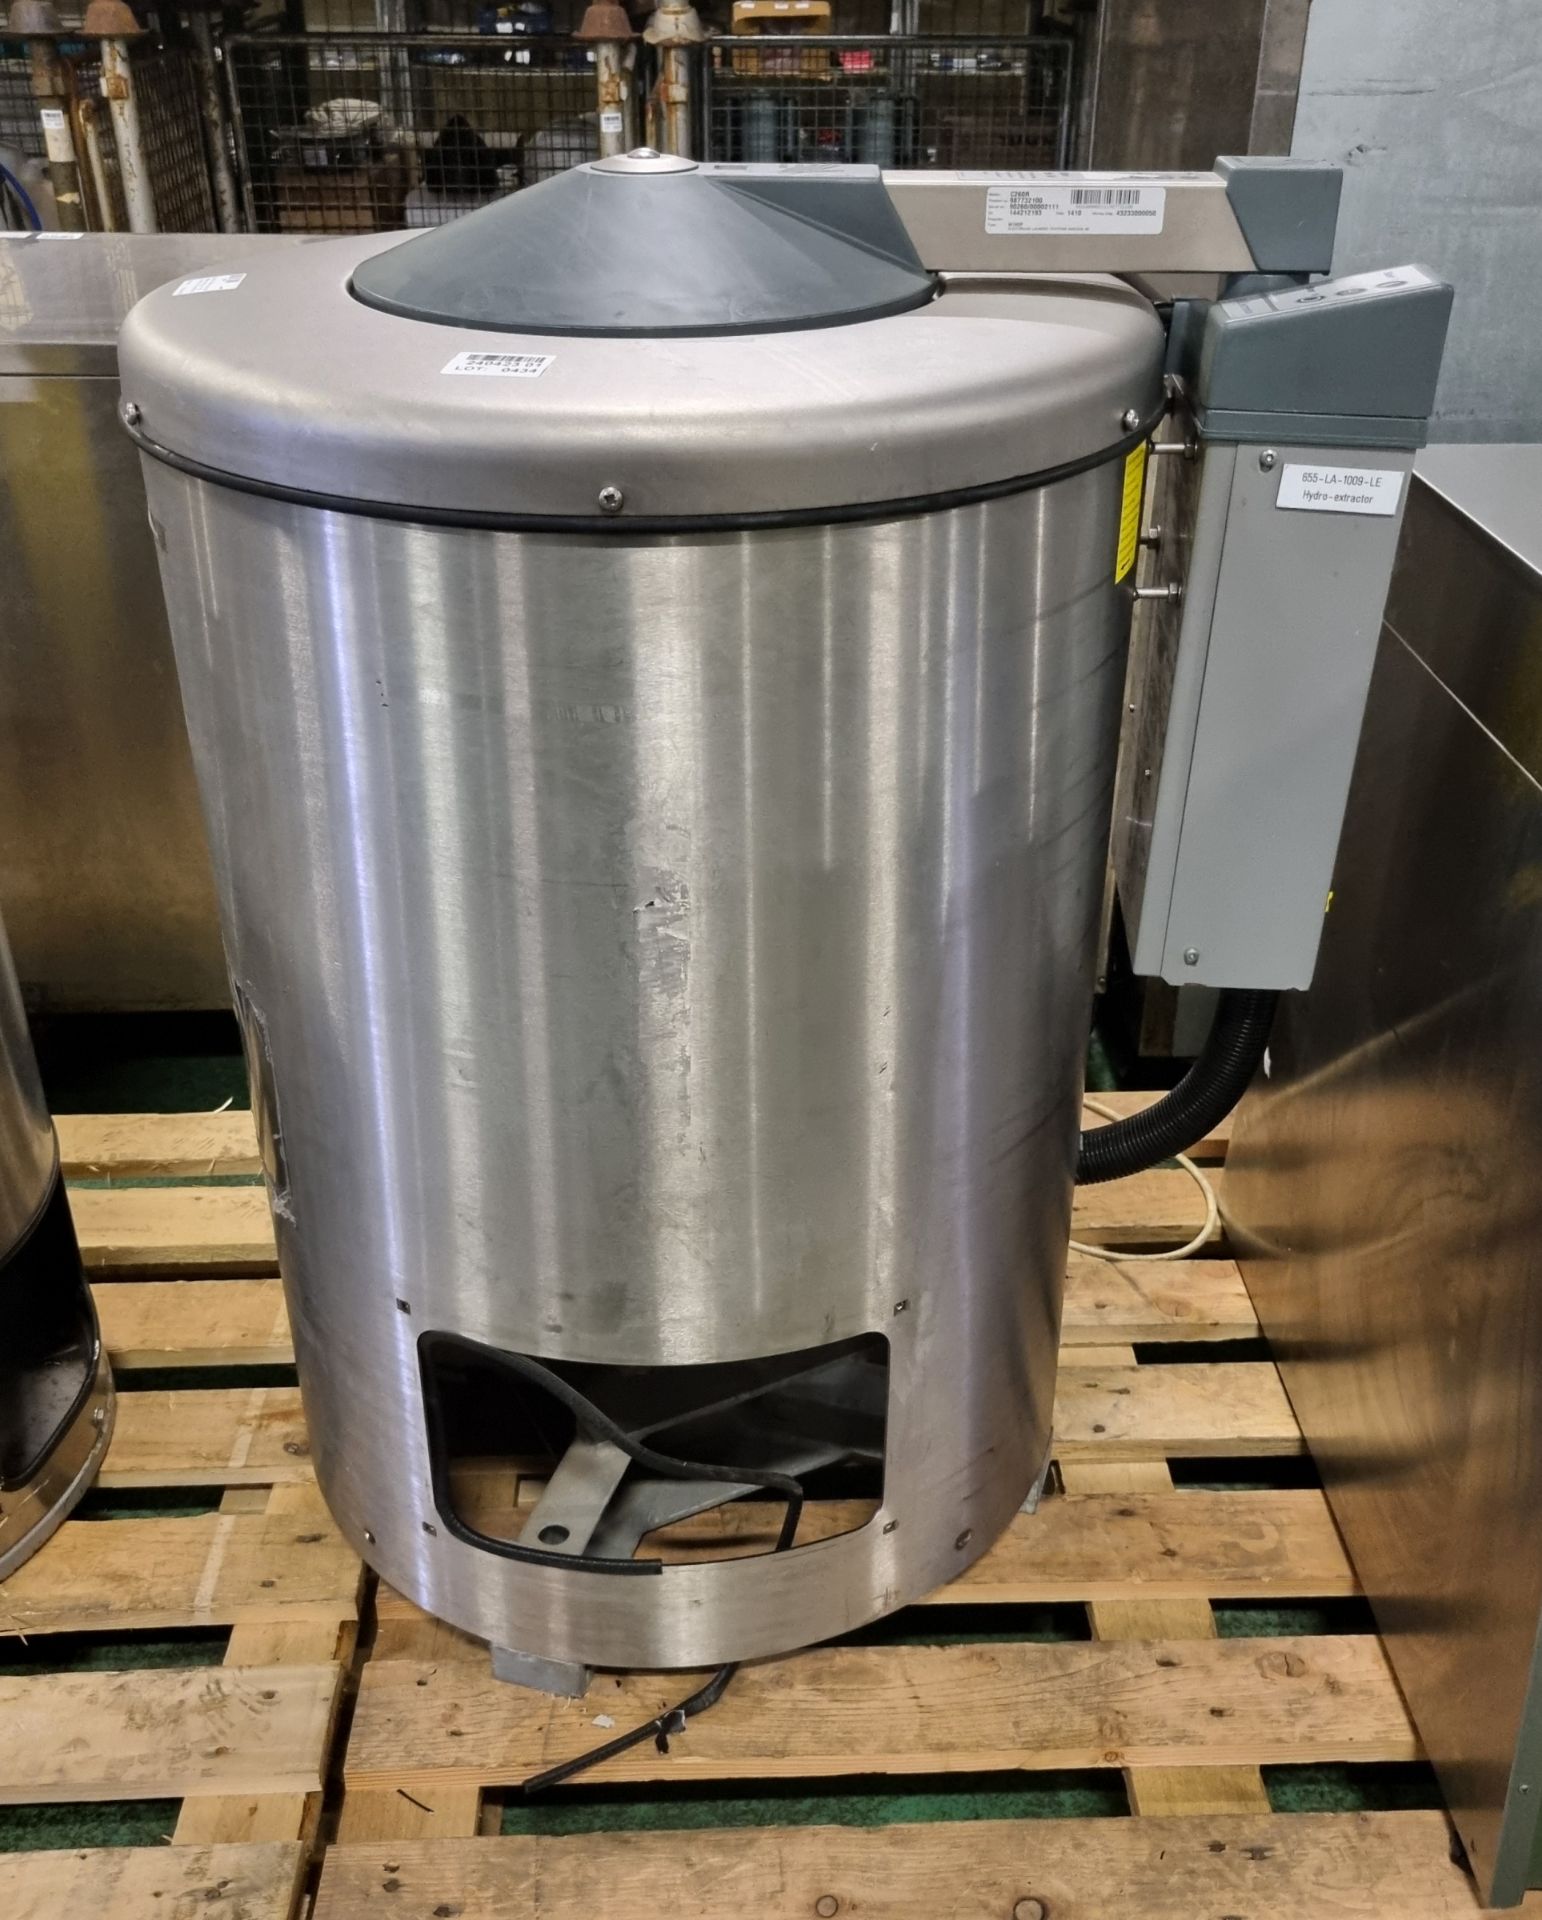 Electrolux C260R 12kg Hydro extractor spin dryer (Missing lower side cover) - 415V